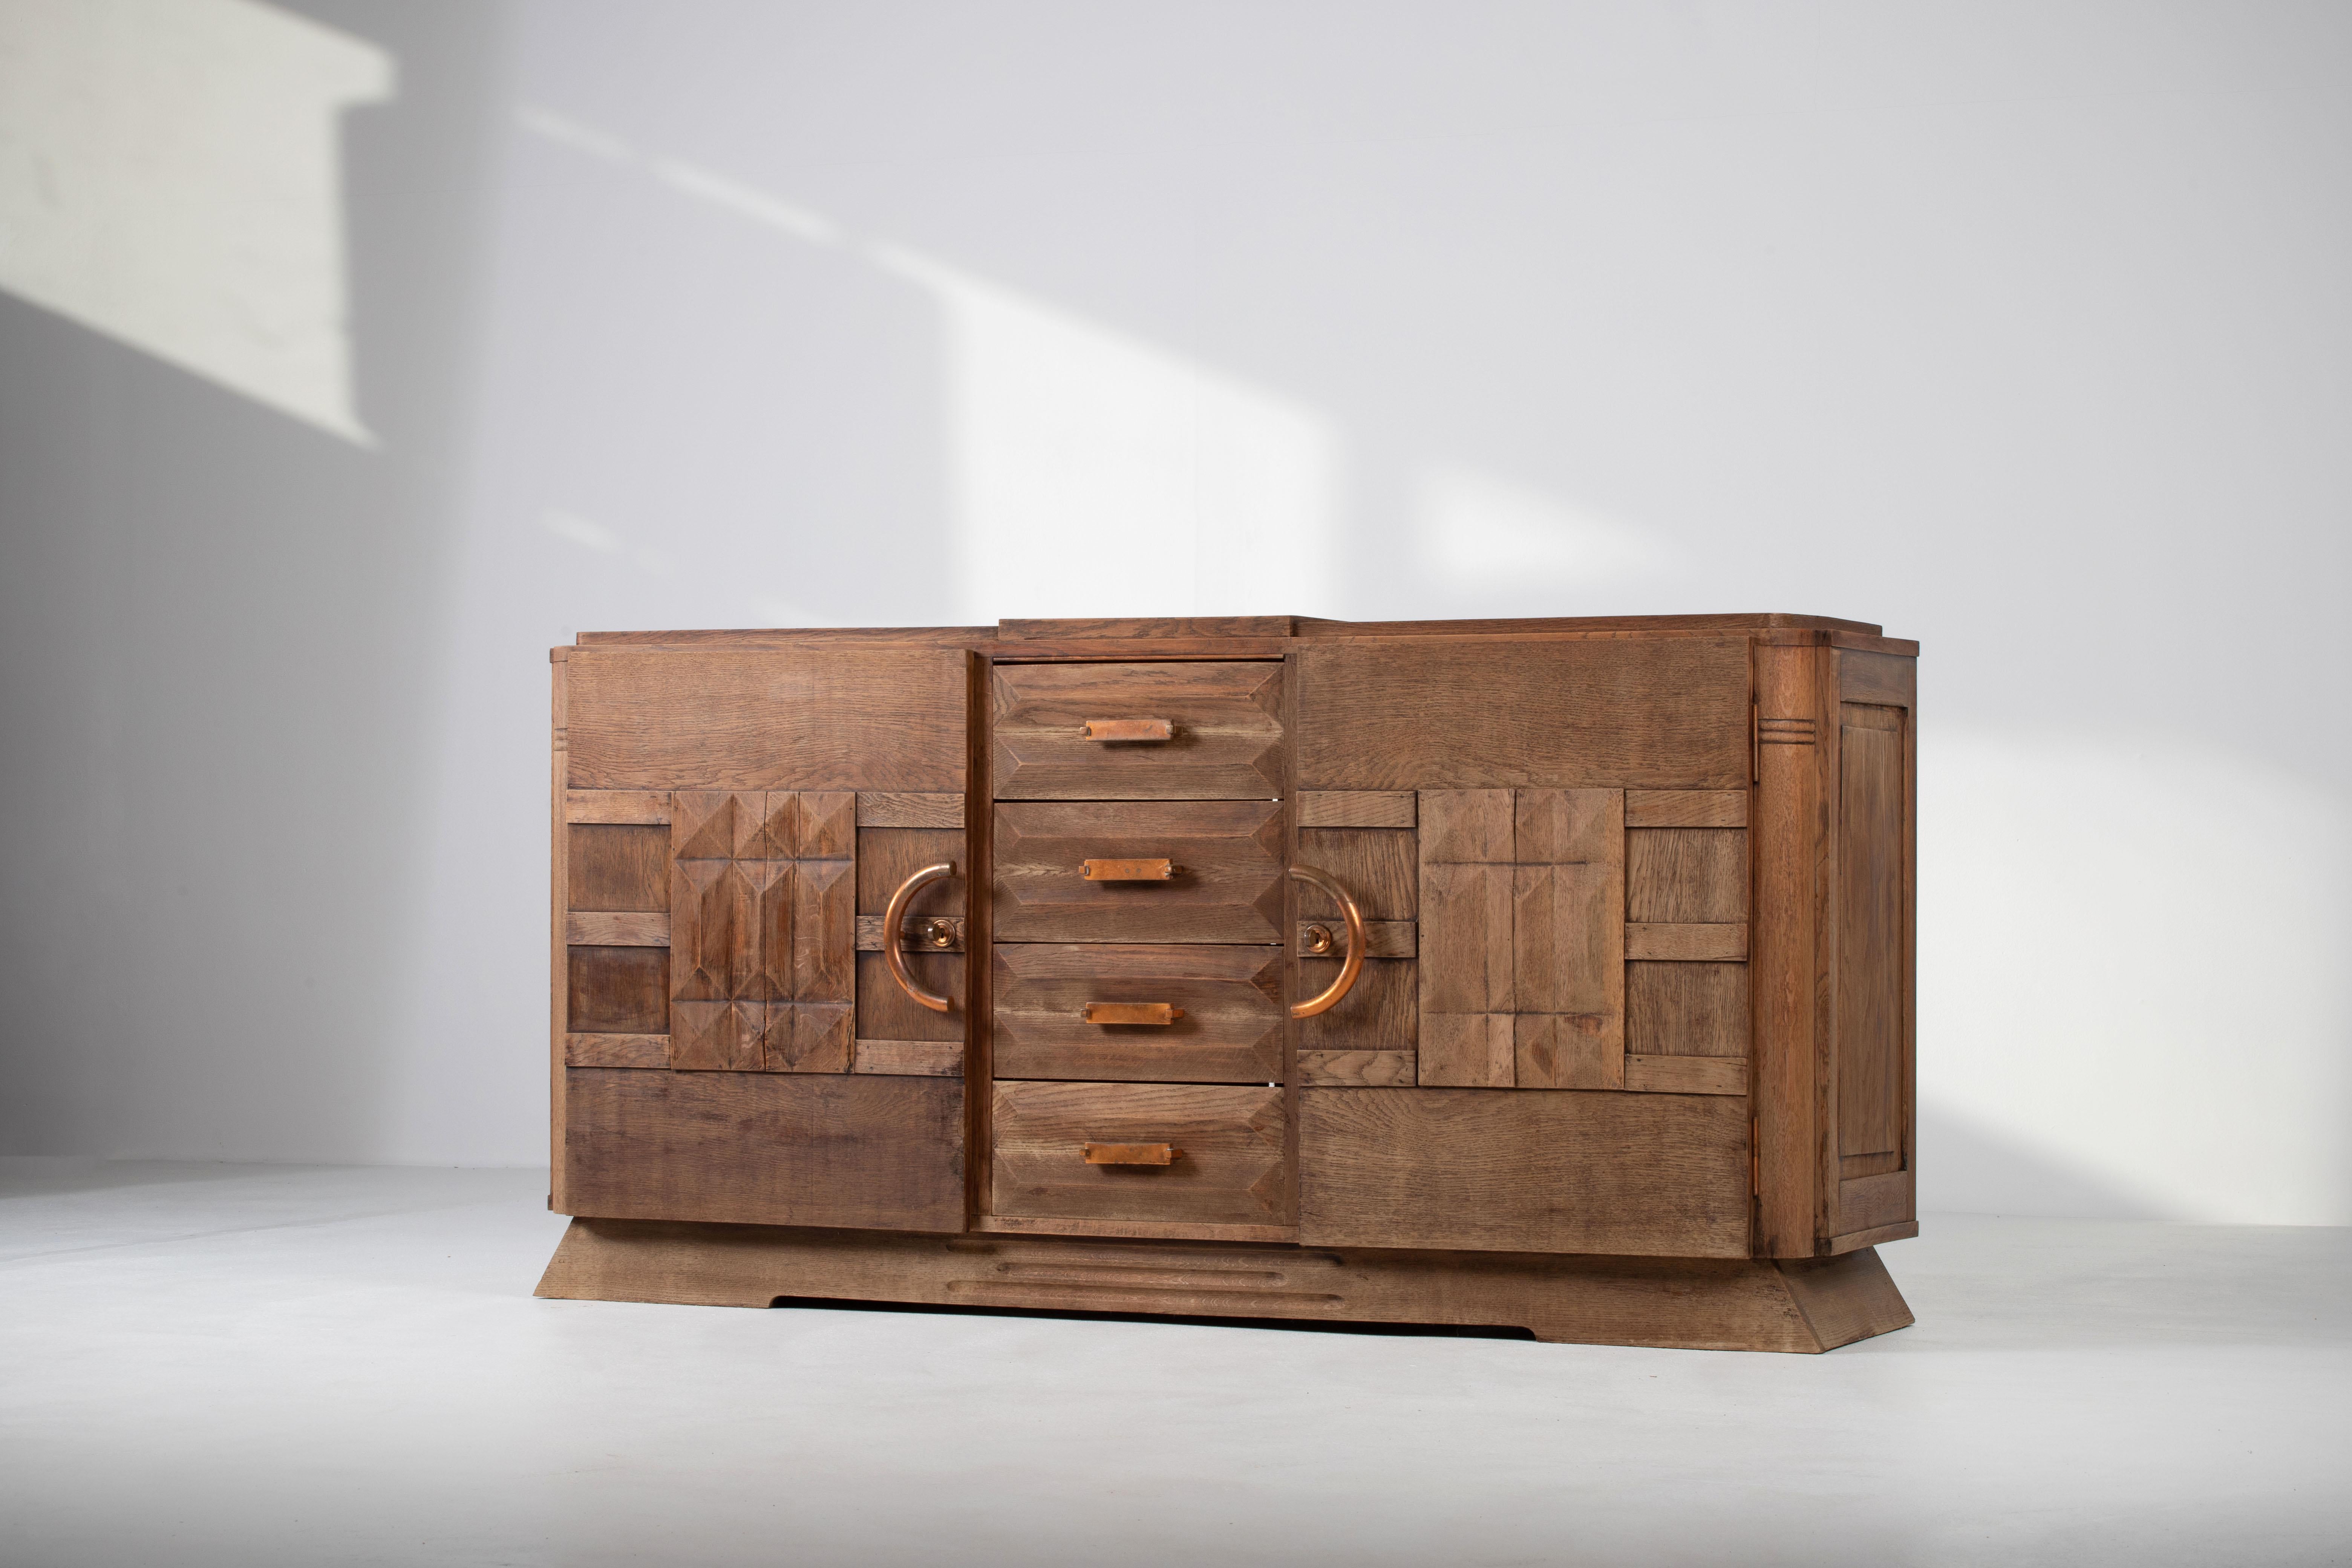 Bleached Solid Oak Credenza with Graphic Details, France, 1940s For Sale 3